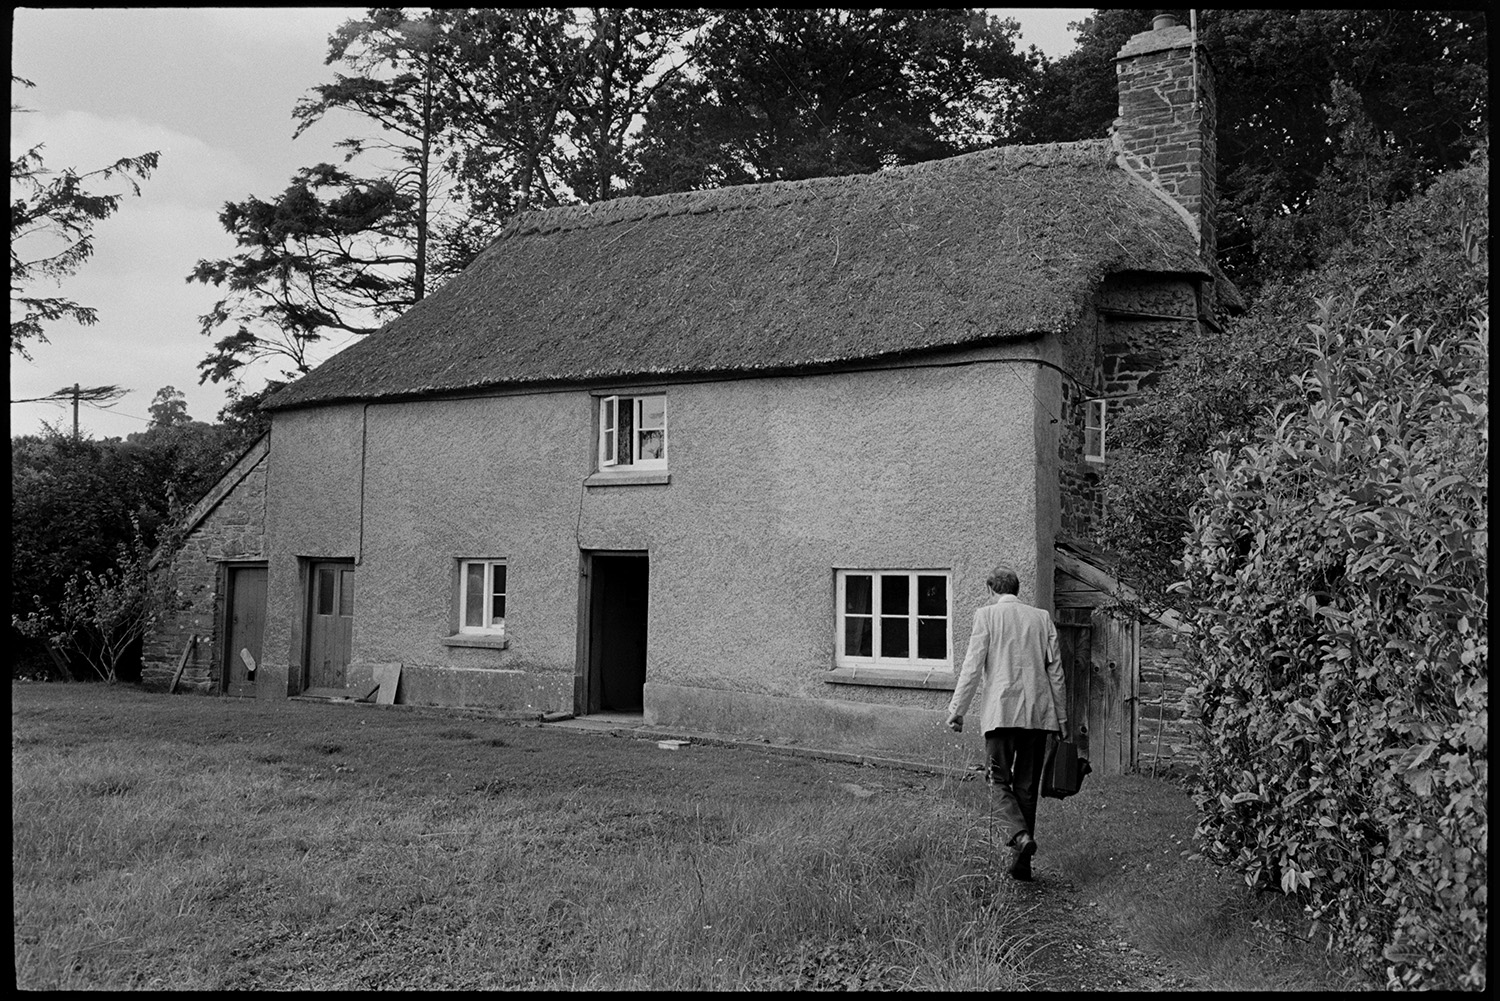 Doctor visiting patient in thatched cottage, walking up to house with bag.
[Doctor Richard Westcott walking up a path to visit a patient in a thatched cottage at Bottreaux Mill, Molland.]